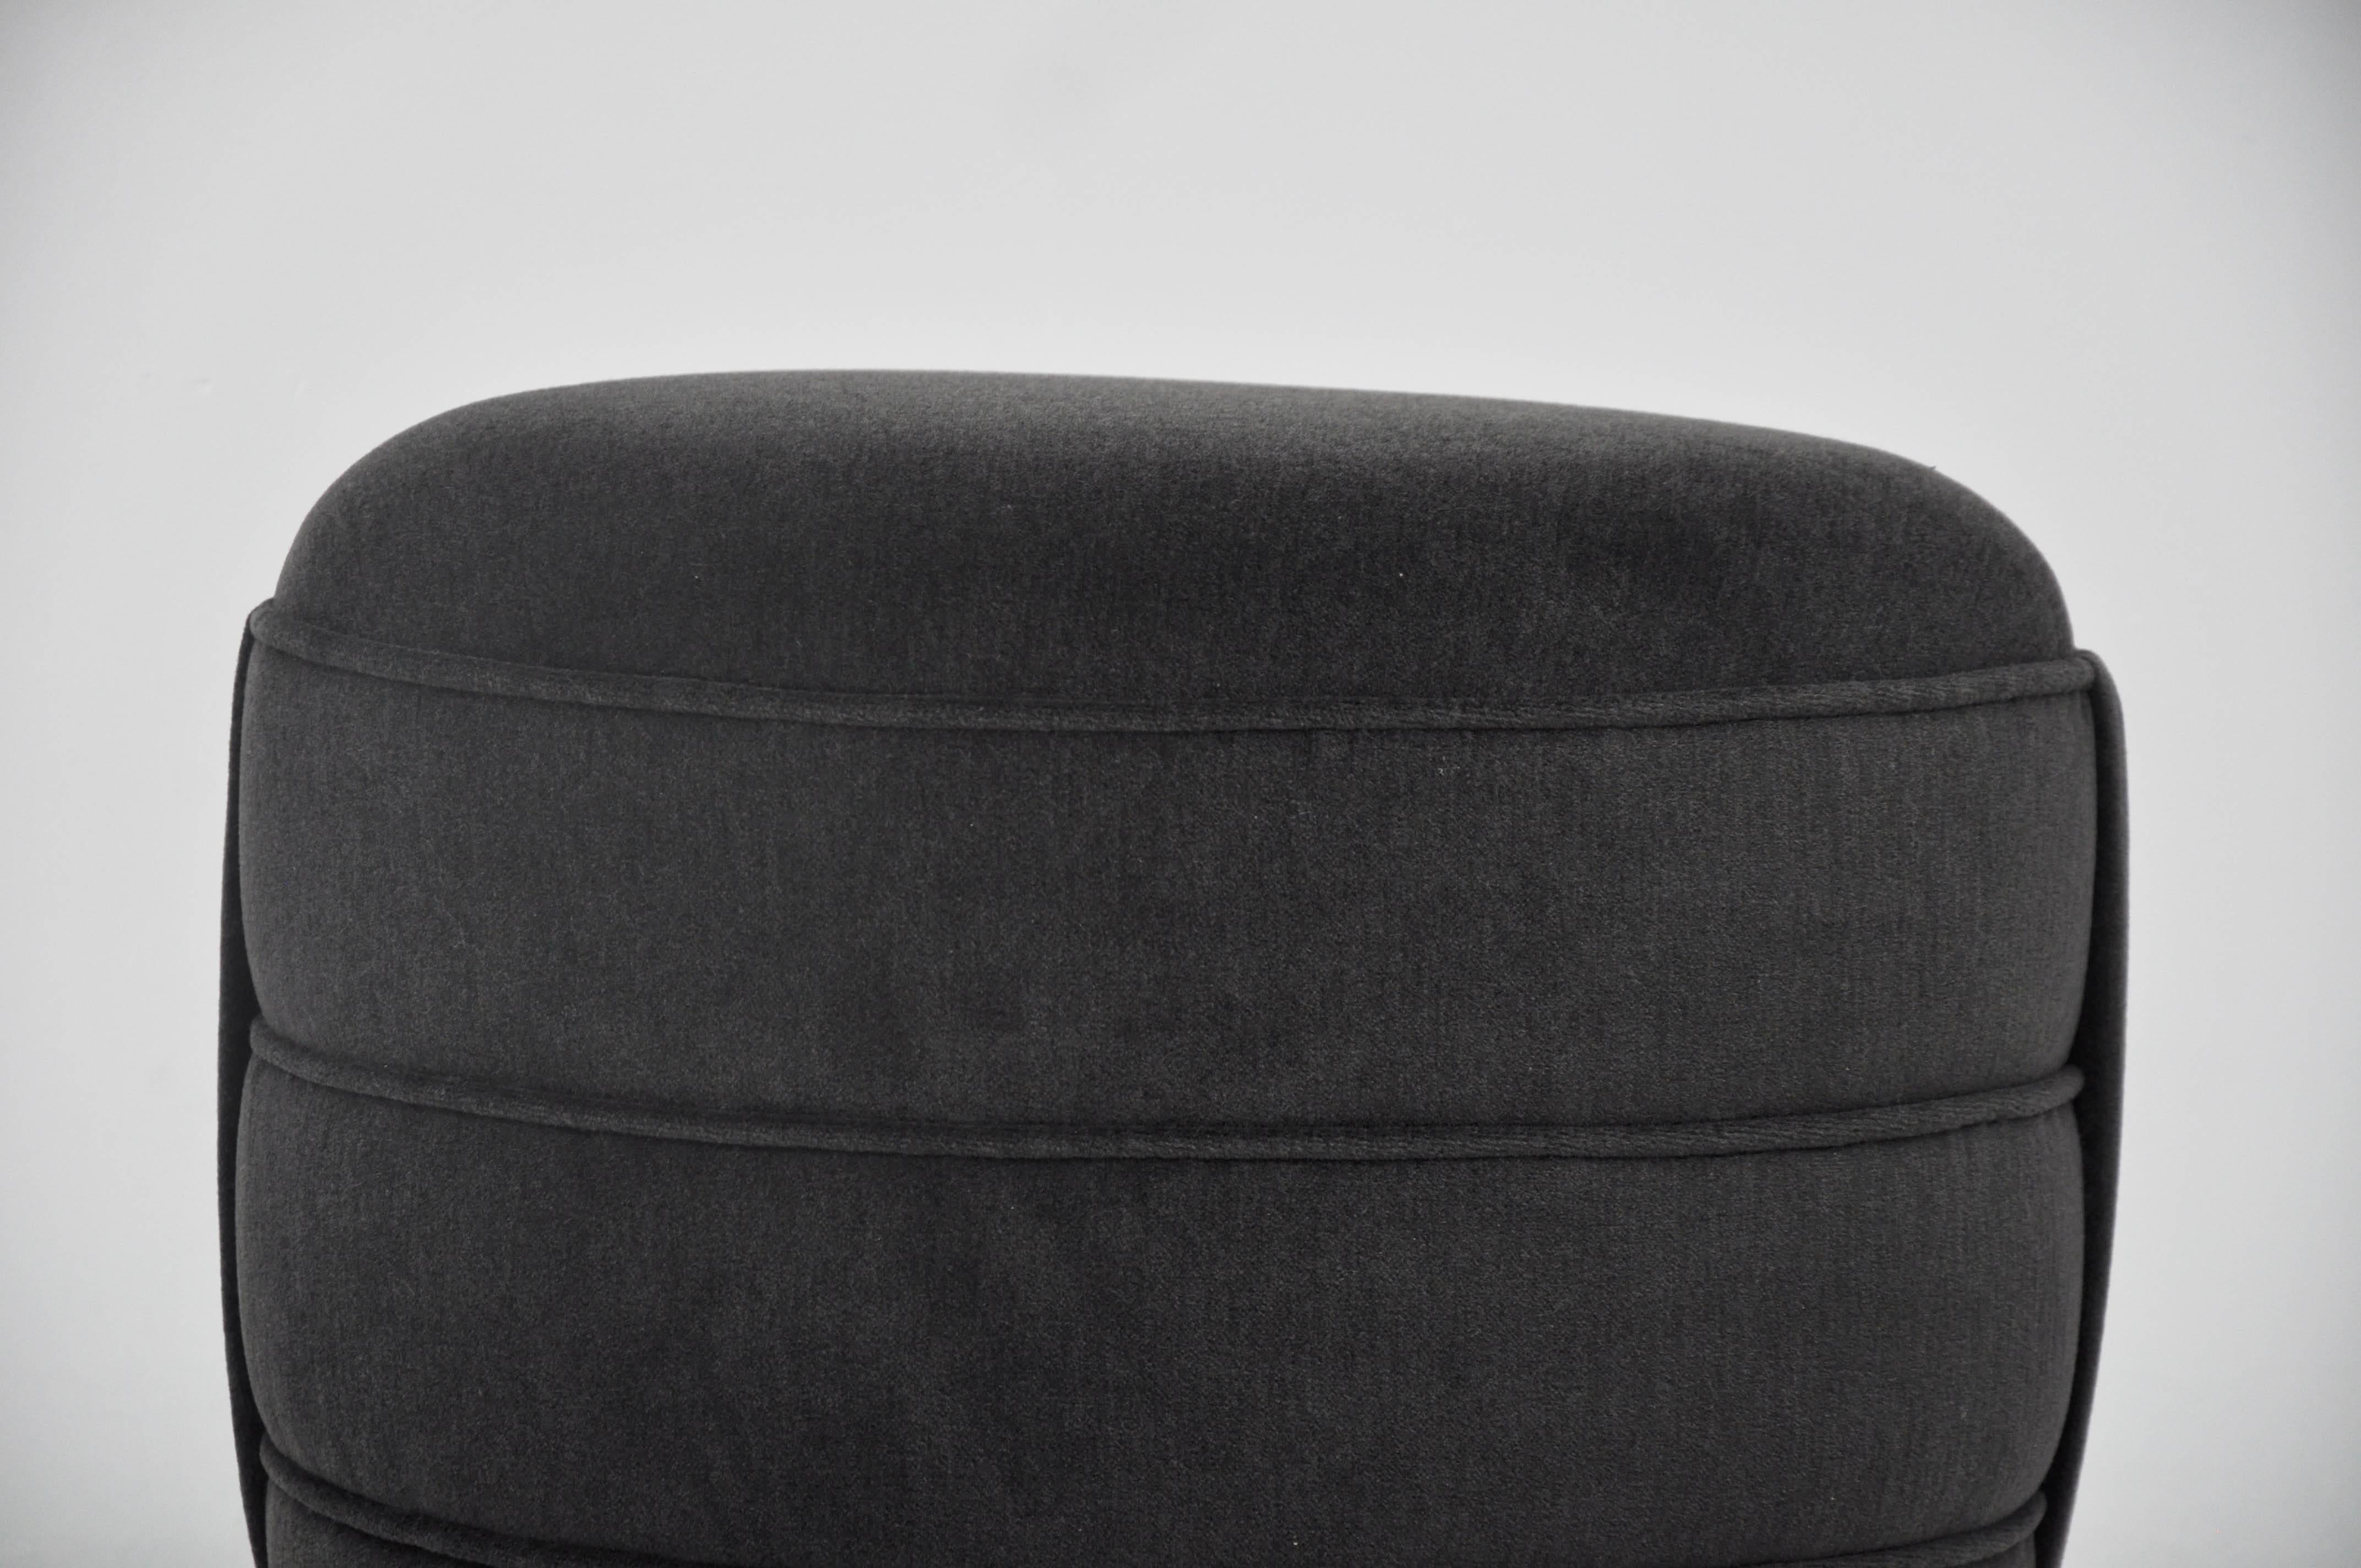 Early design pouf ottoman by Edward Wormey for Dunbar. Mahogany base with new grey mohair upholstery.